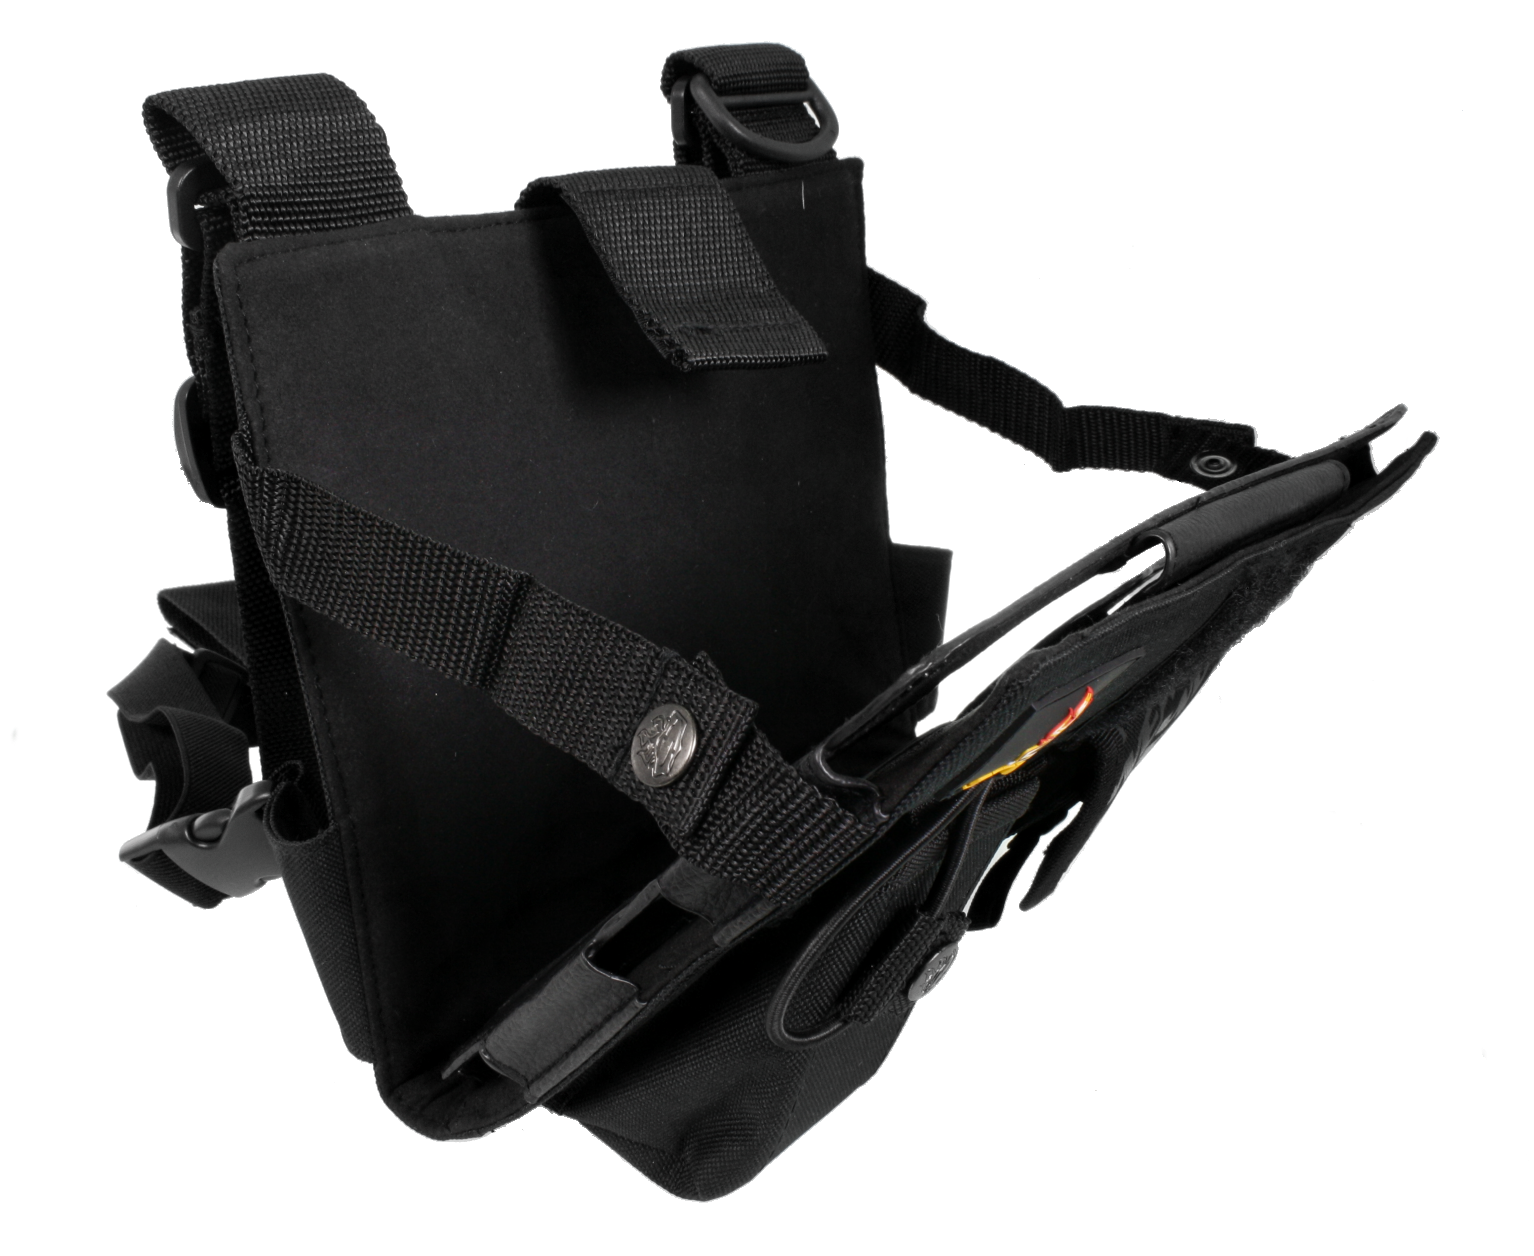 Front open, showing the iPad pocket and support straps